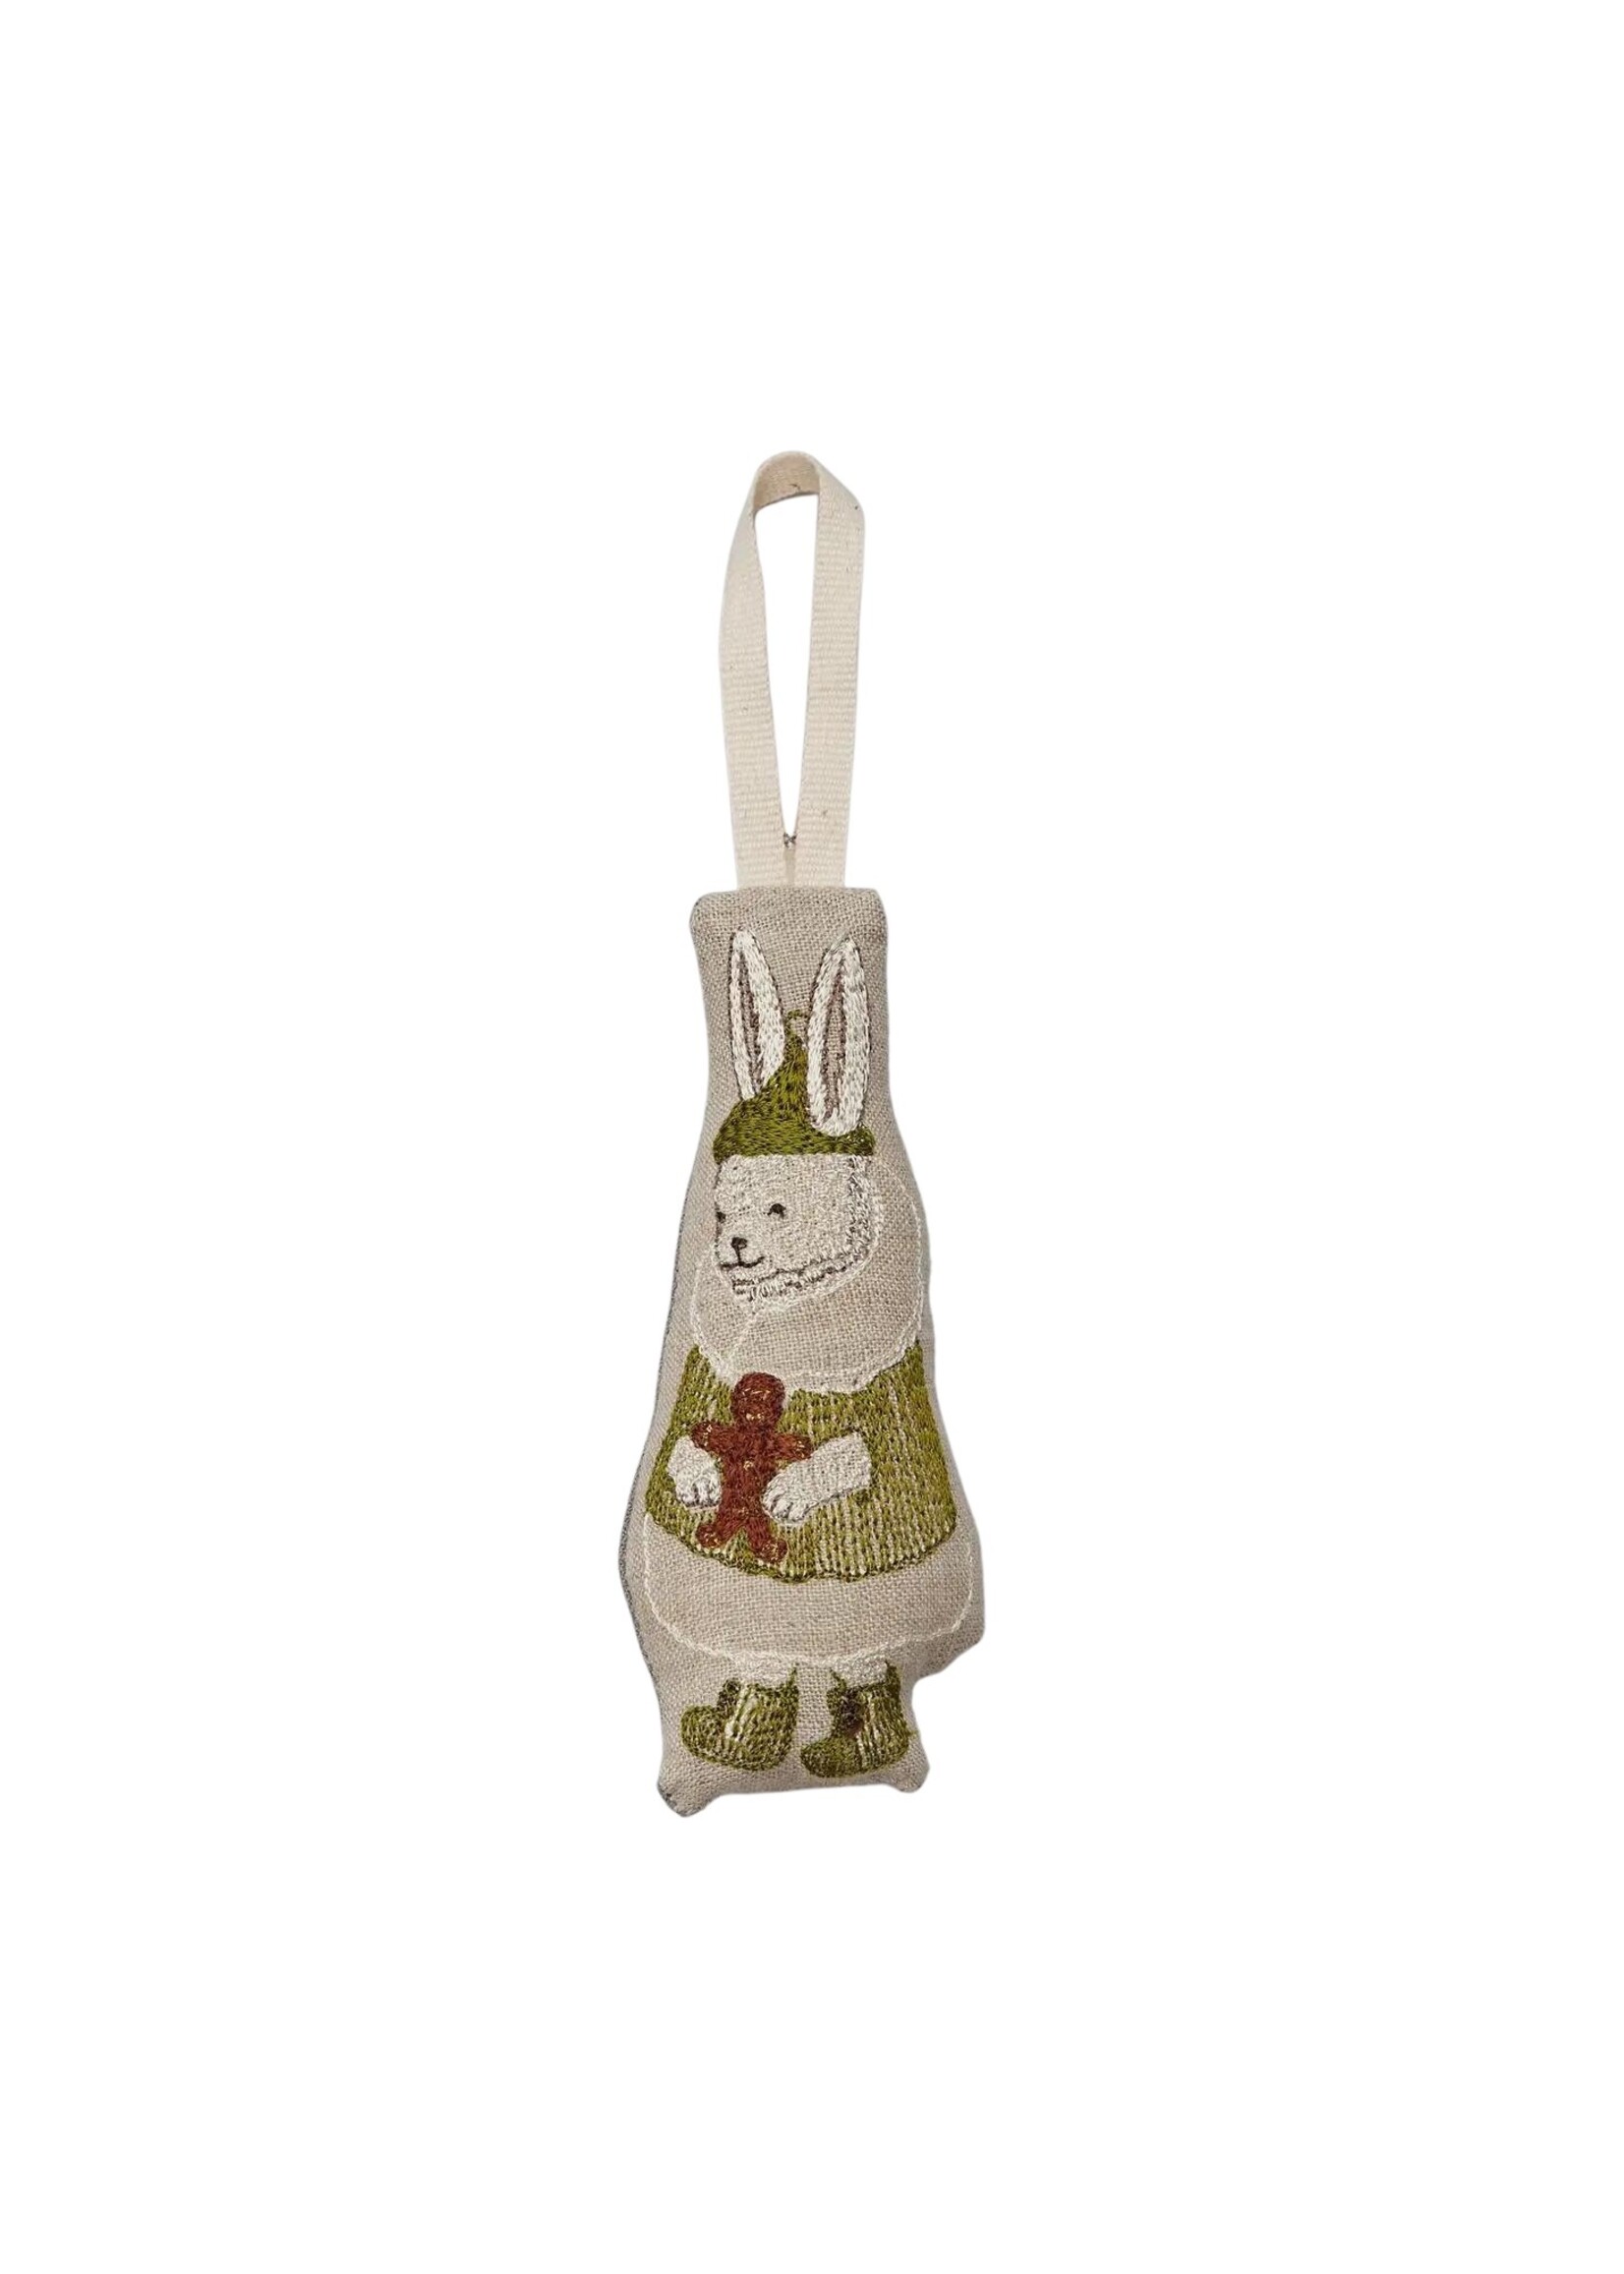 Coral and Tusk Ornament - North Pole Bunny